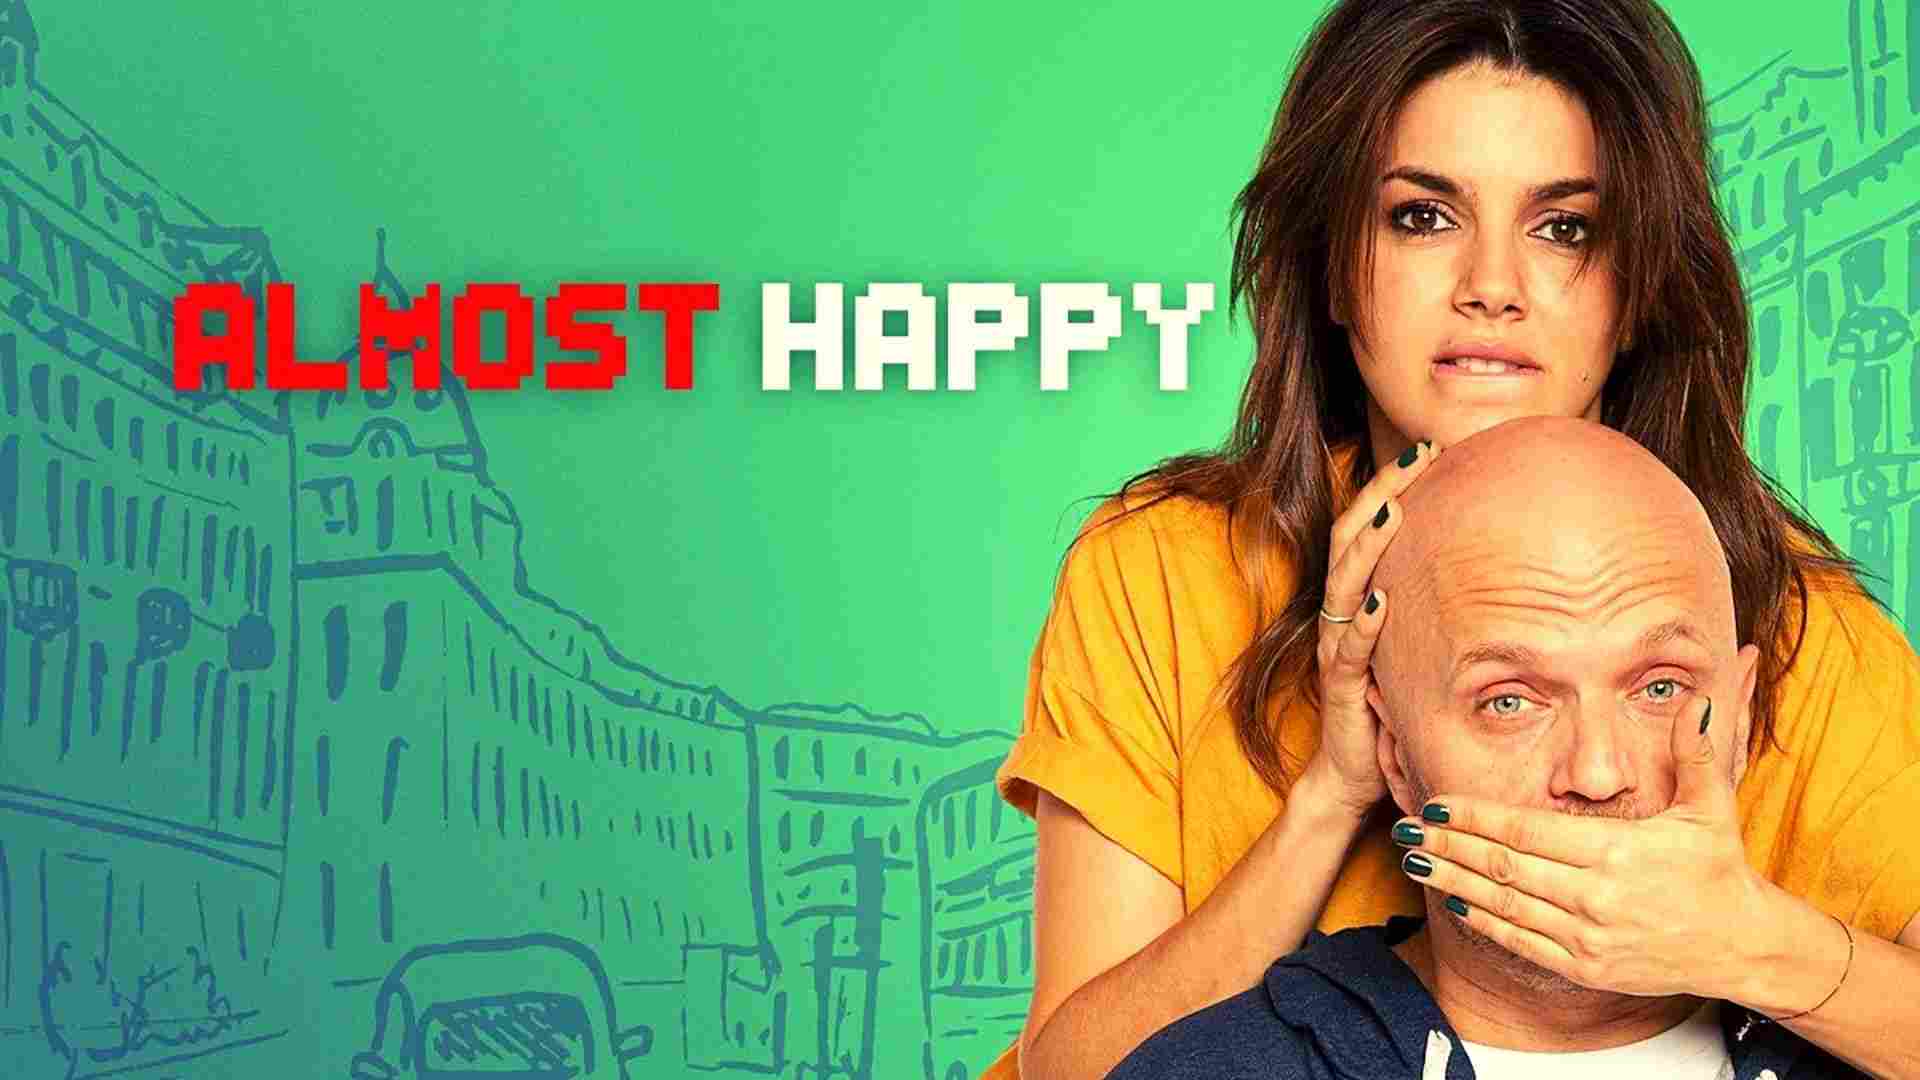 Almost Happy Parents guide and age rating | 2020